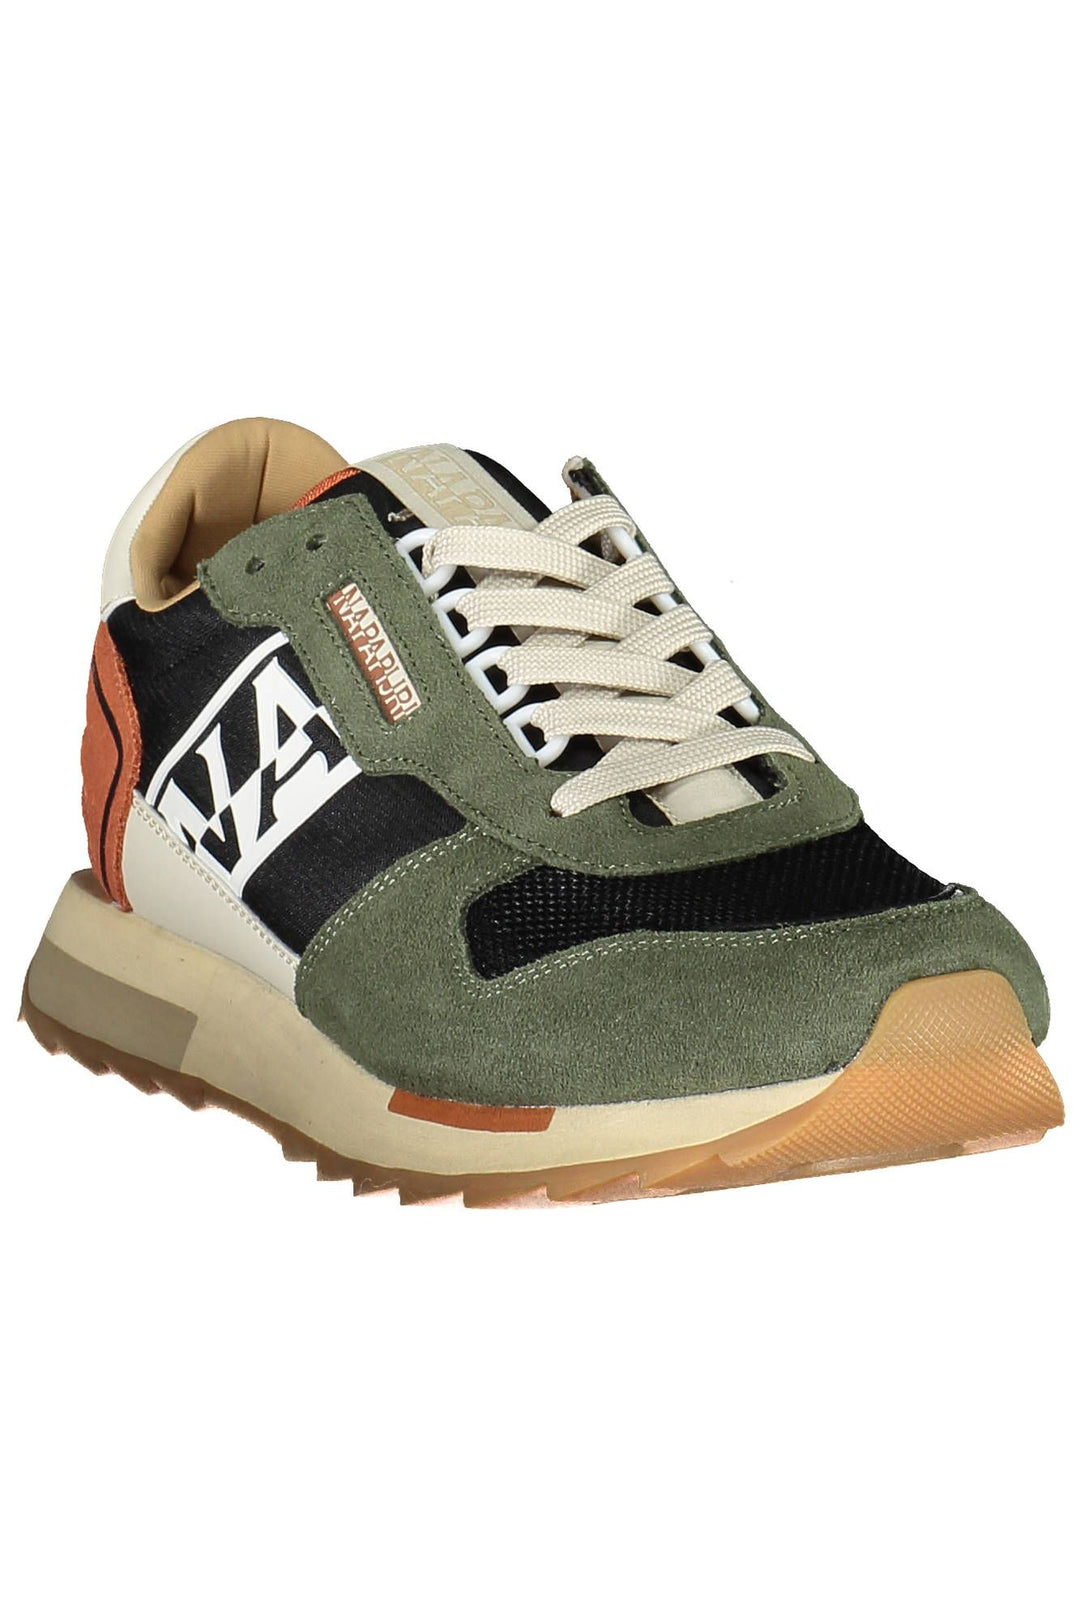 Napapijri Trendy Green Lace-Up Sneakers for the Modern Man